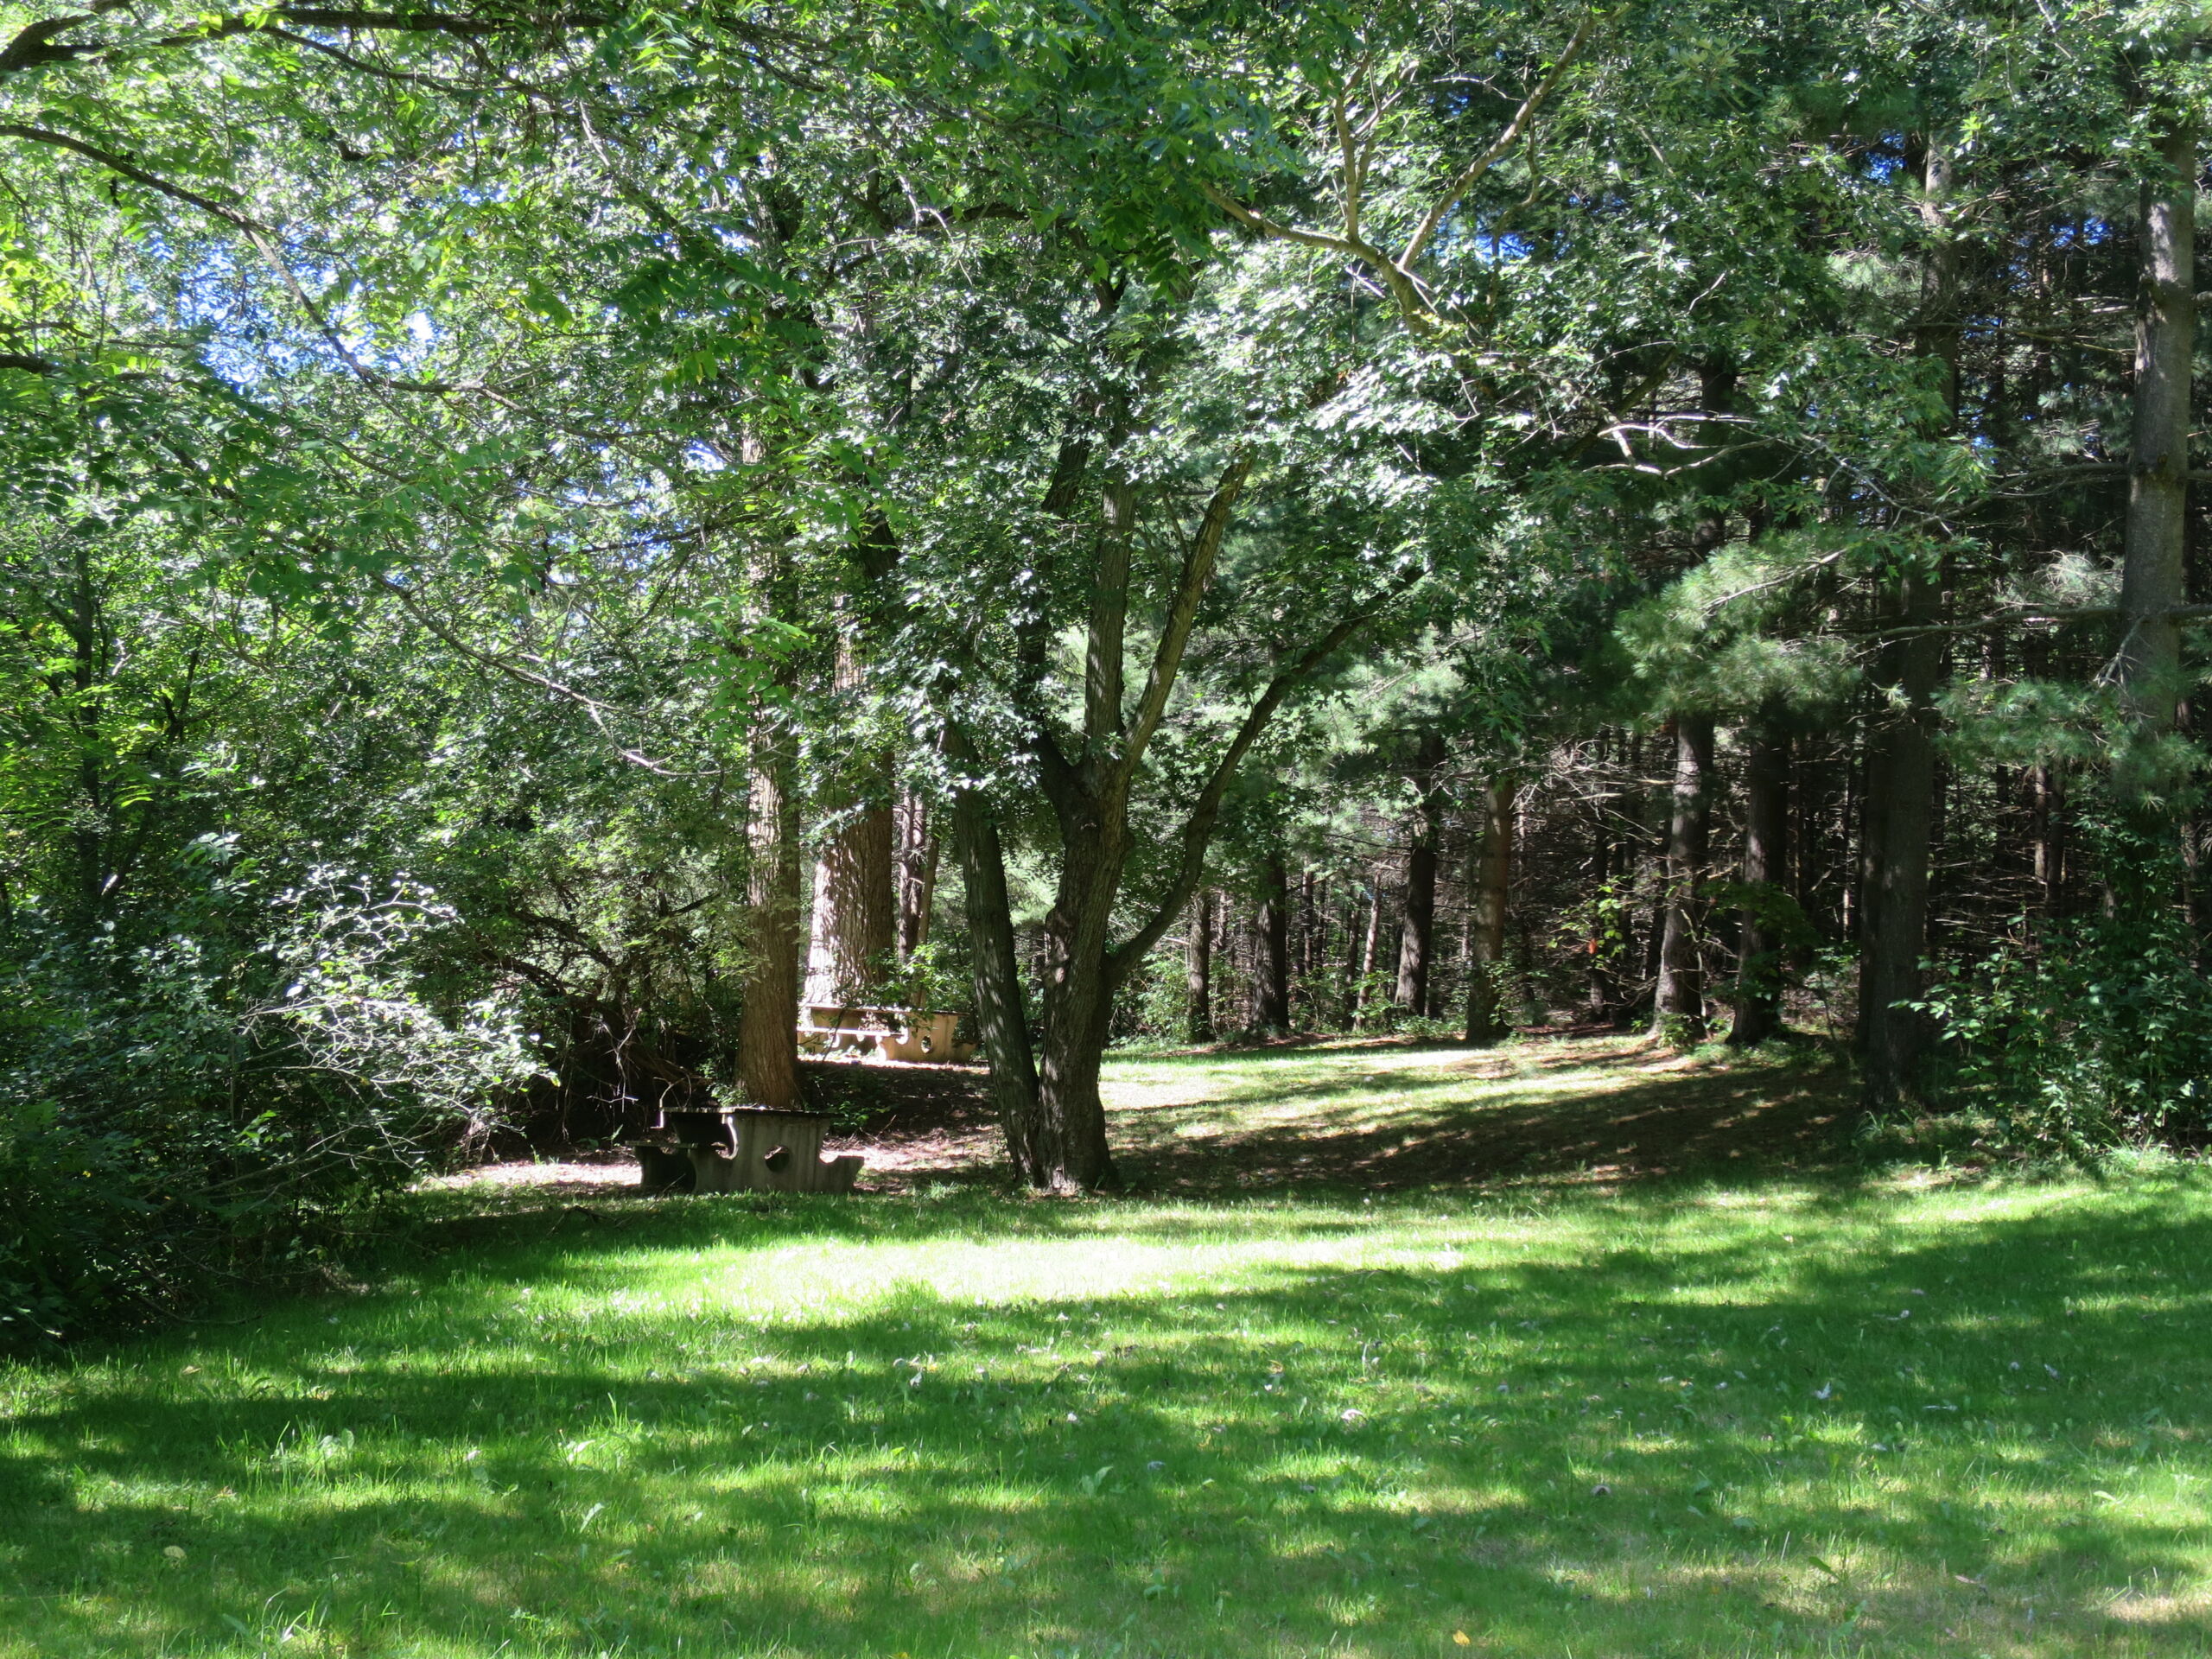 Picnic tables in a grassy area of a forest